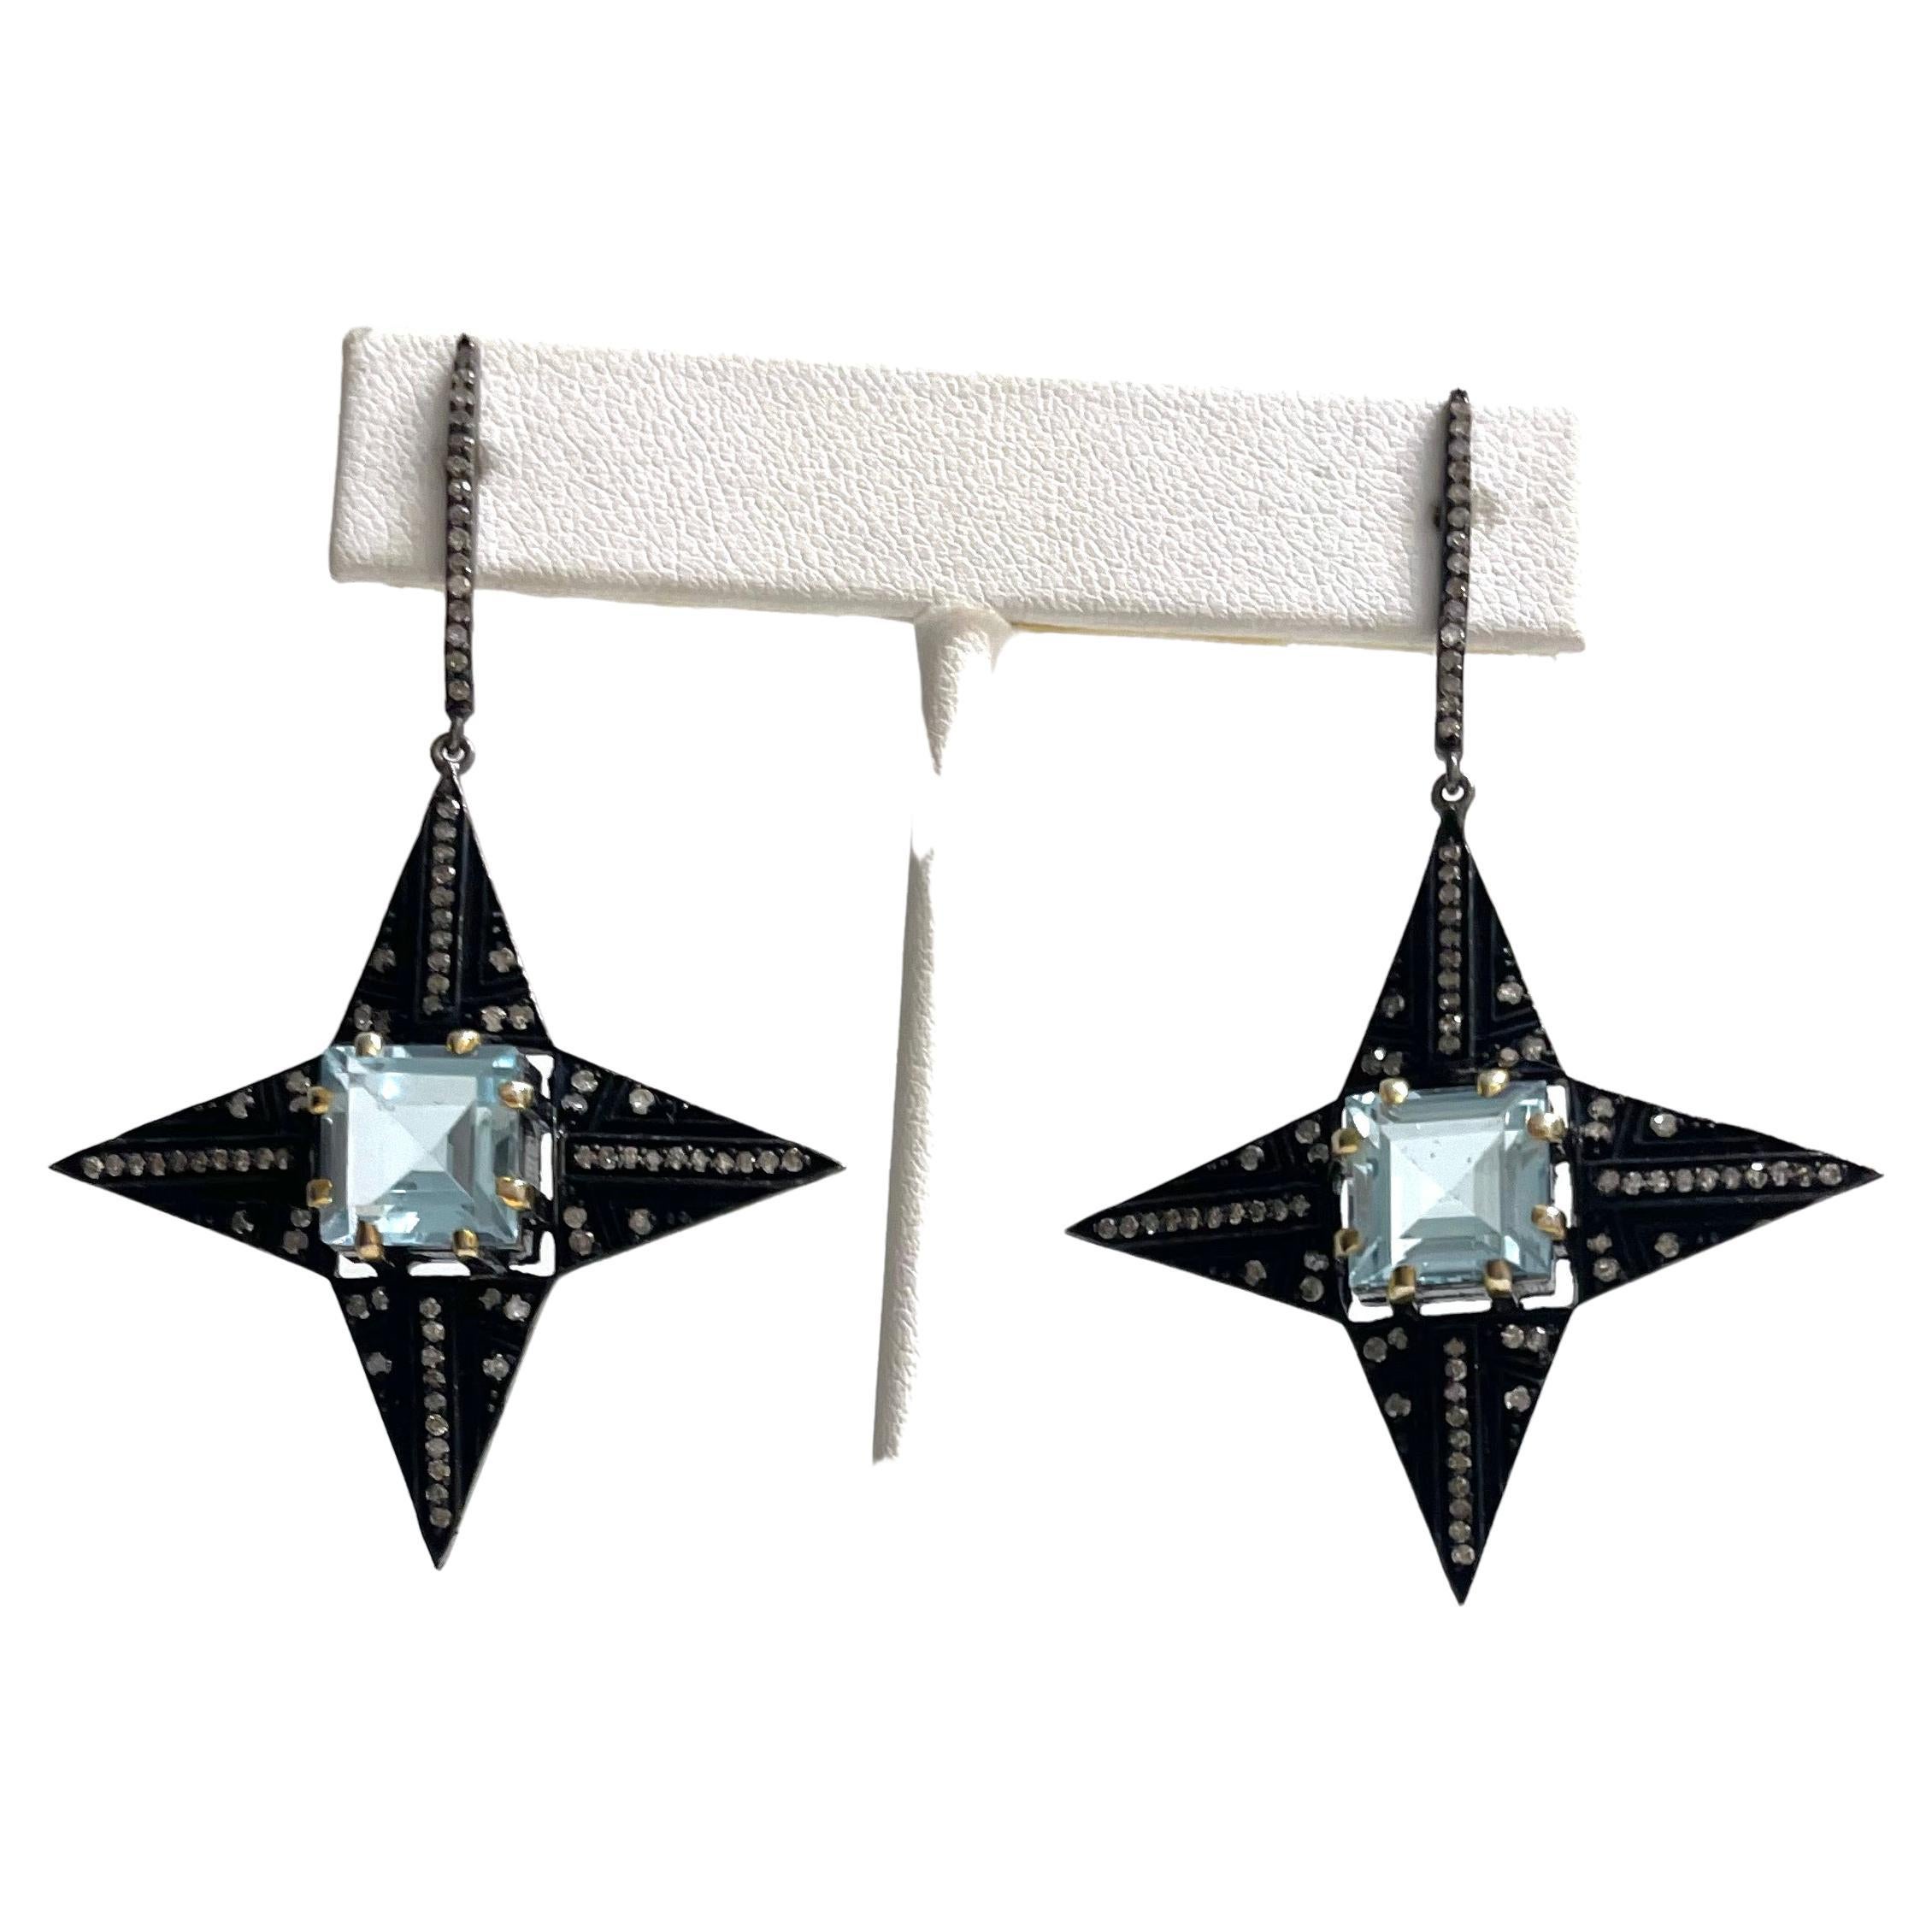 Description
These unique and stylish earrings feature a striking Blue Topaz surrounded by pave diamonds set in a bold black four-pointed star creating a dramatic, galaxy starry night eye catching effect.
Item # E3308

Materials and Weight
Blue